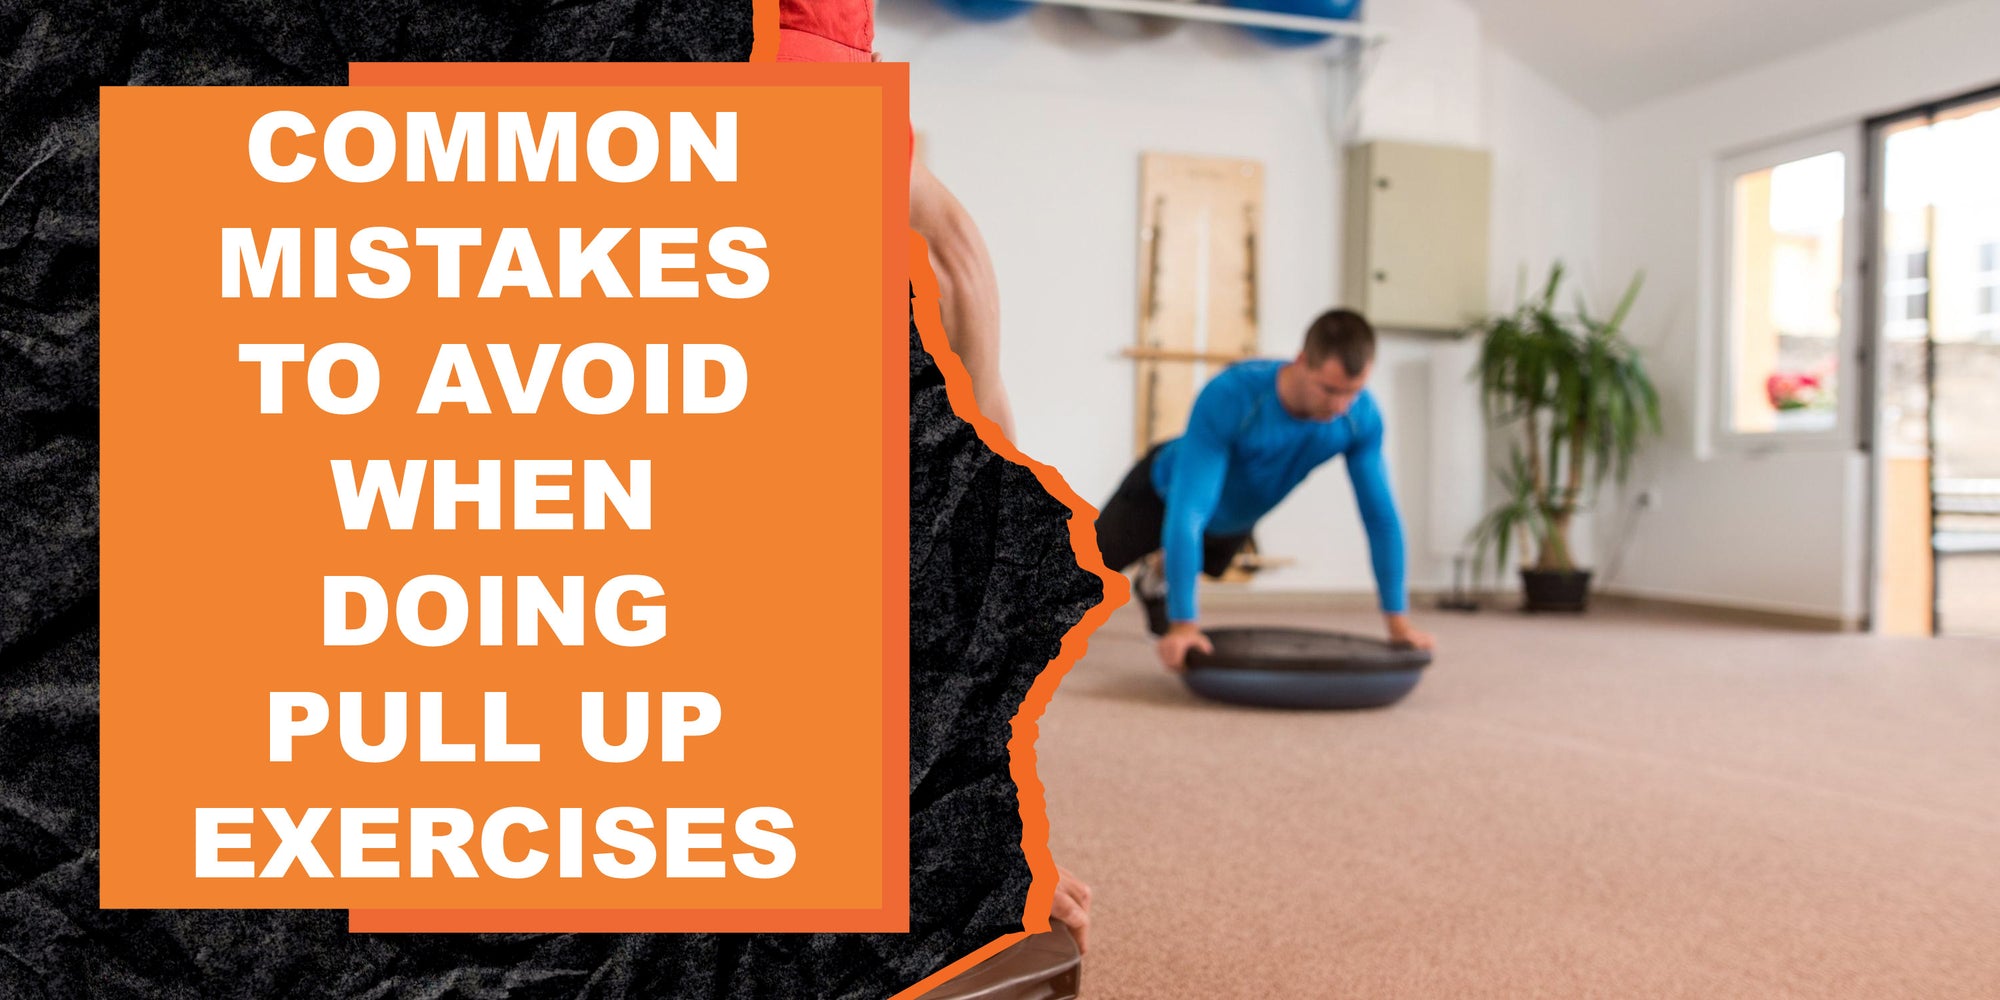 Common Mistakes to Avoid When Doing Pull Up Exercises